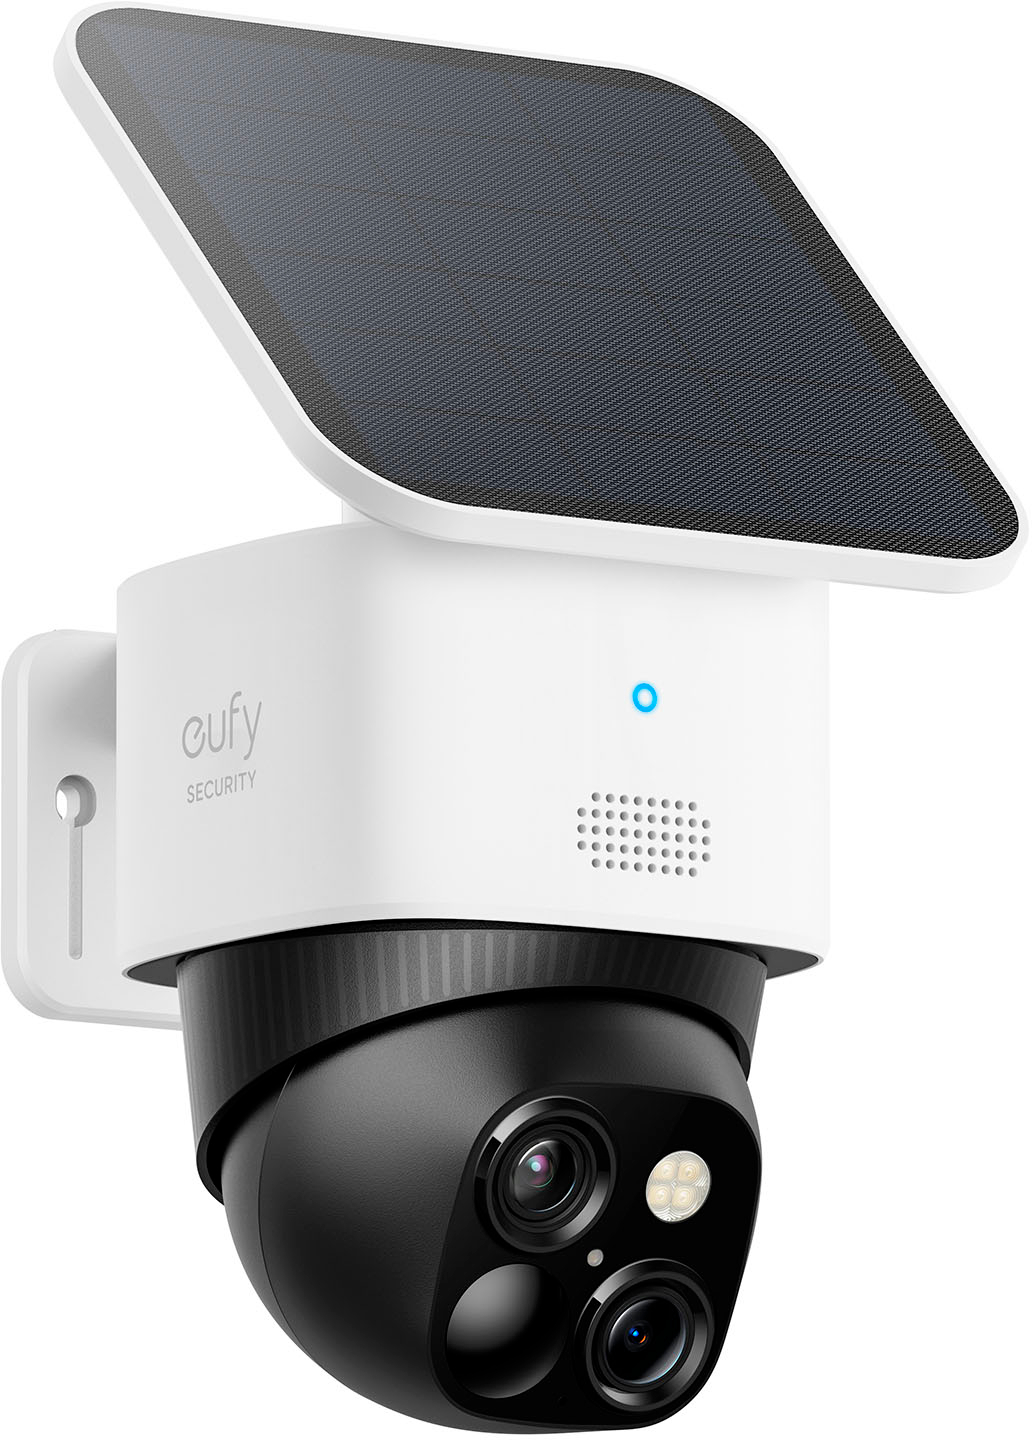 Angle View: eufy Security - SoloCam S340 Outdoor Wireless 3k Security Camera with Dual Lens - White